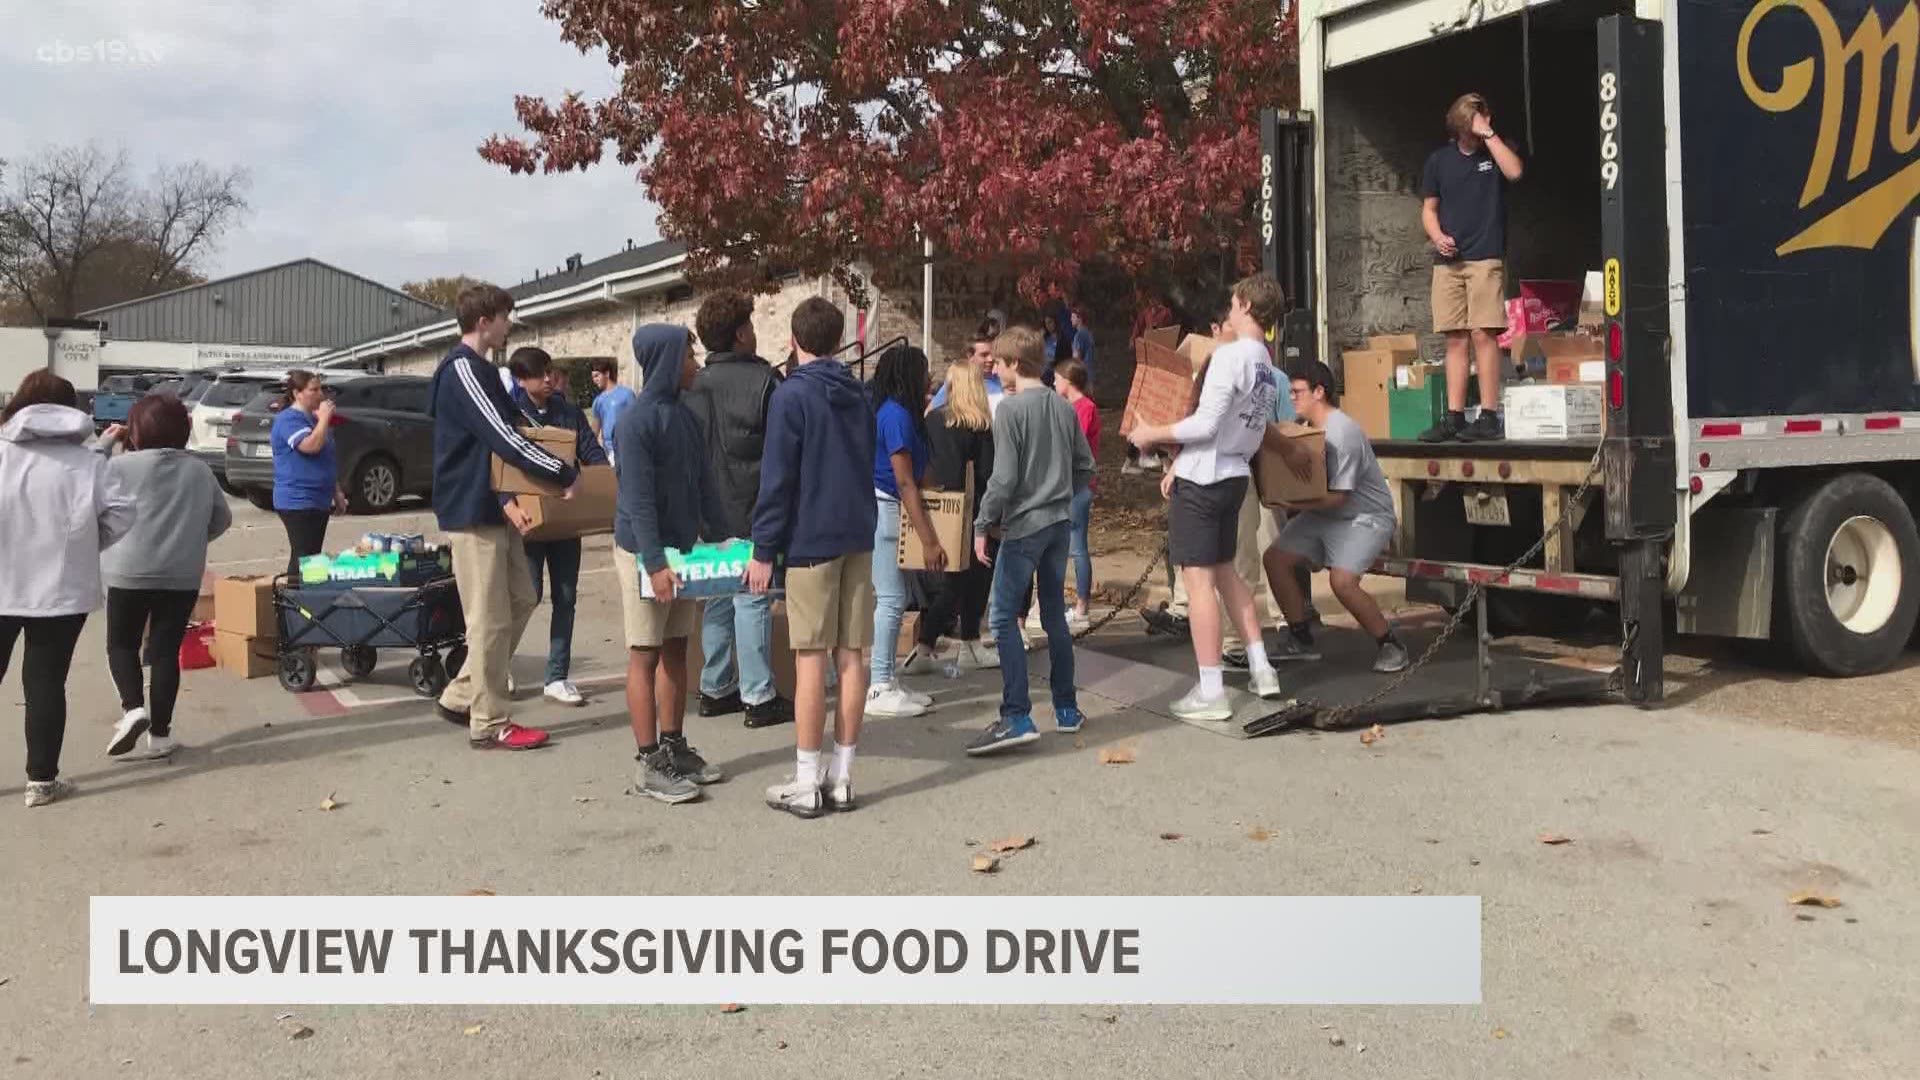 Longview Thanksgiving is looking for volunteers for its annual food drive on Nov. 23 at the Maude Cobb Convention & Activity Center.